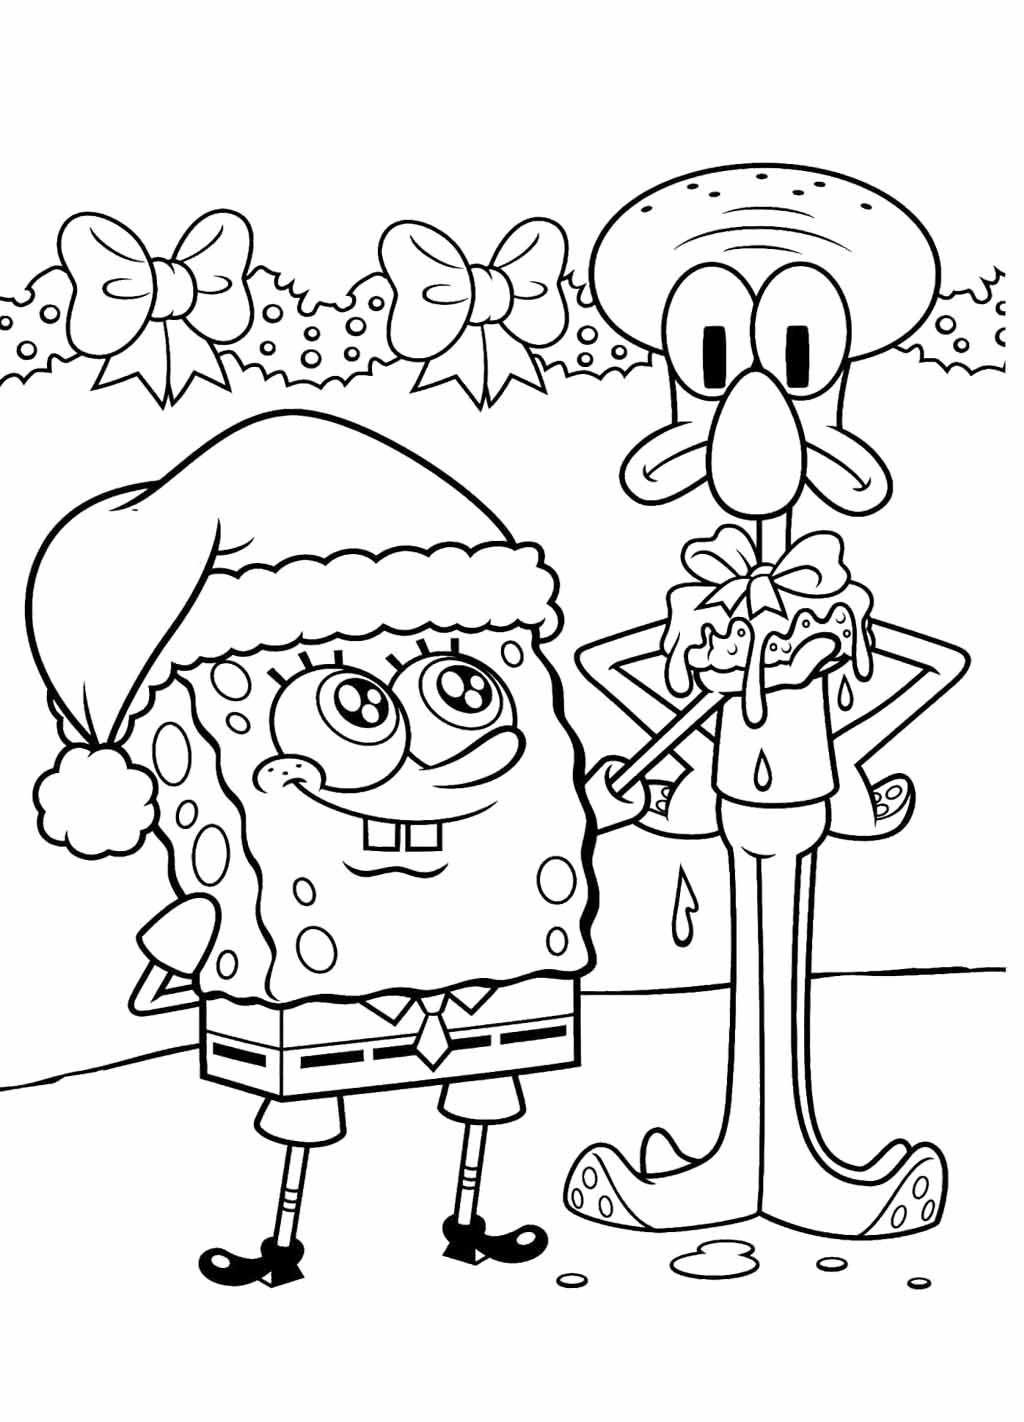 Free Squidward Coloring Pages Happy Christmas printable